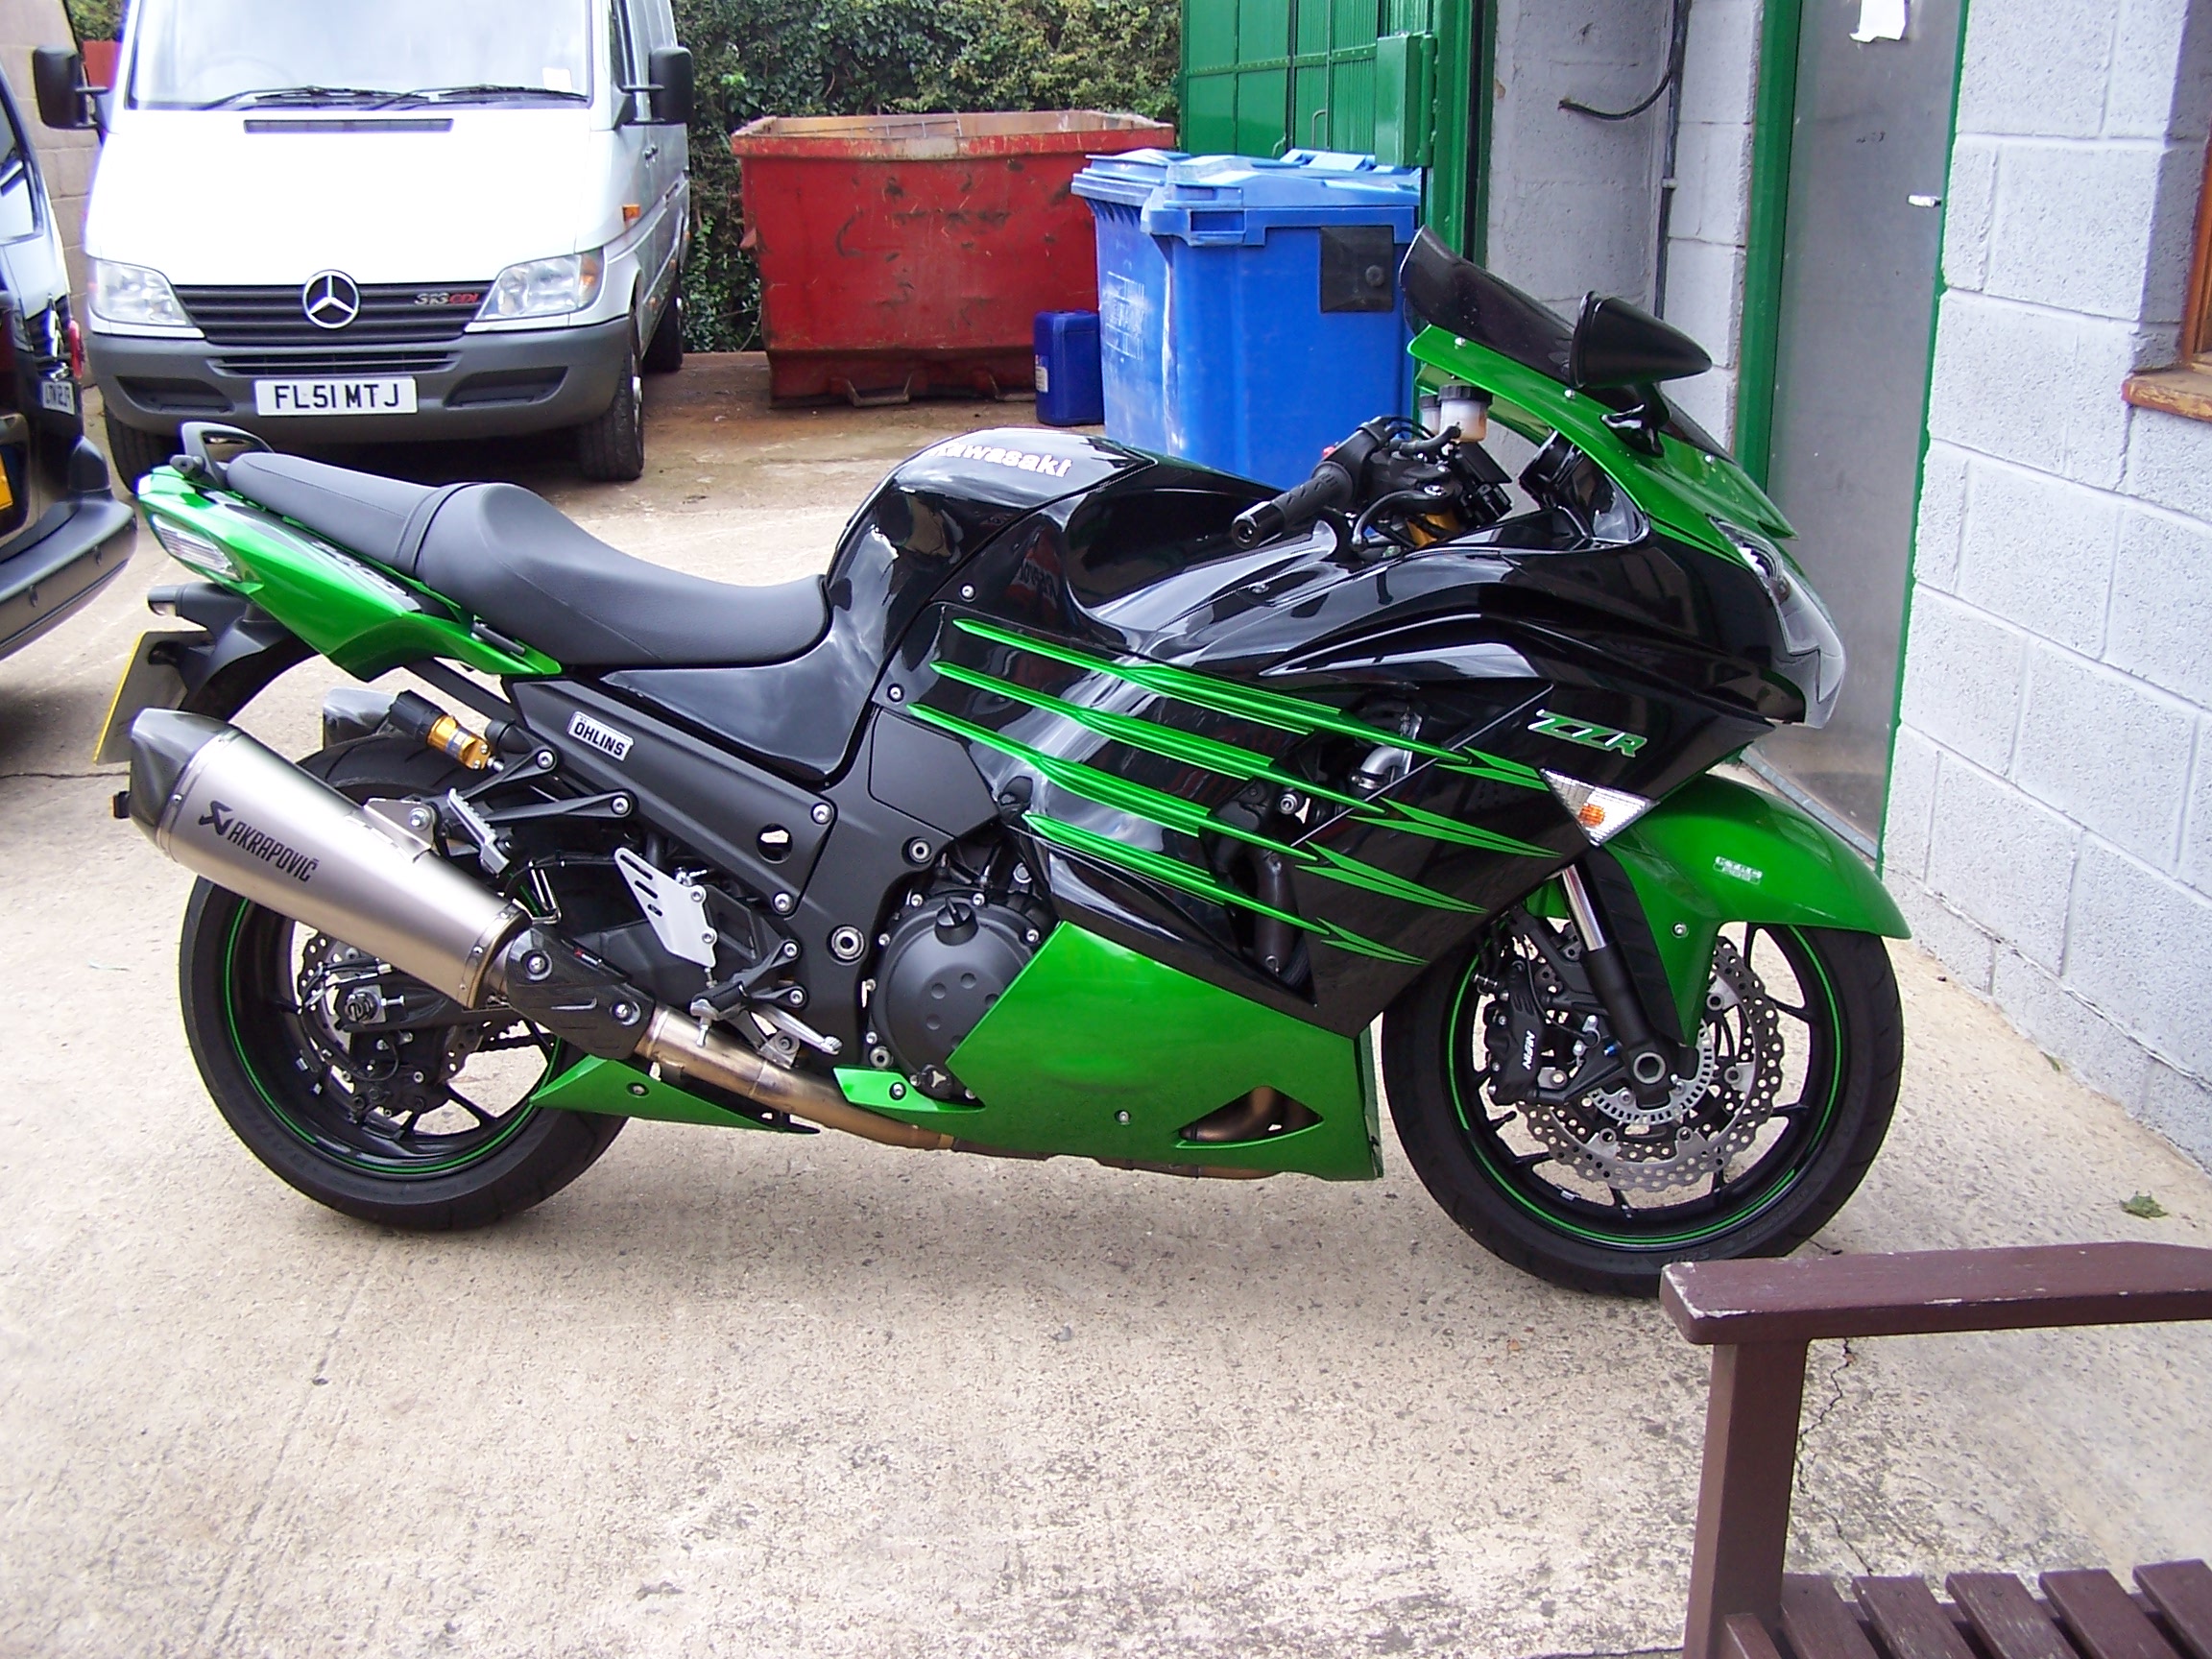 2014 Kawasaki ZZR1400 ECU remap – 195bhp at the rear wheel and fully de-restricted. Ouch!